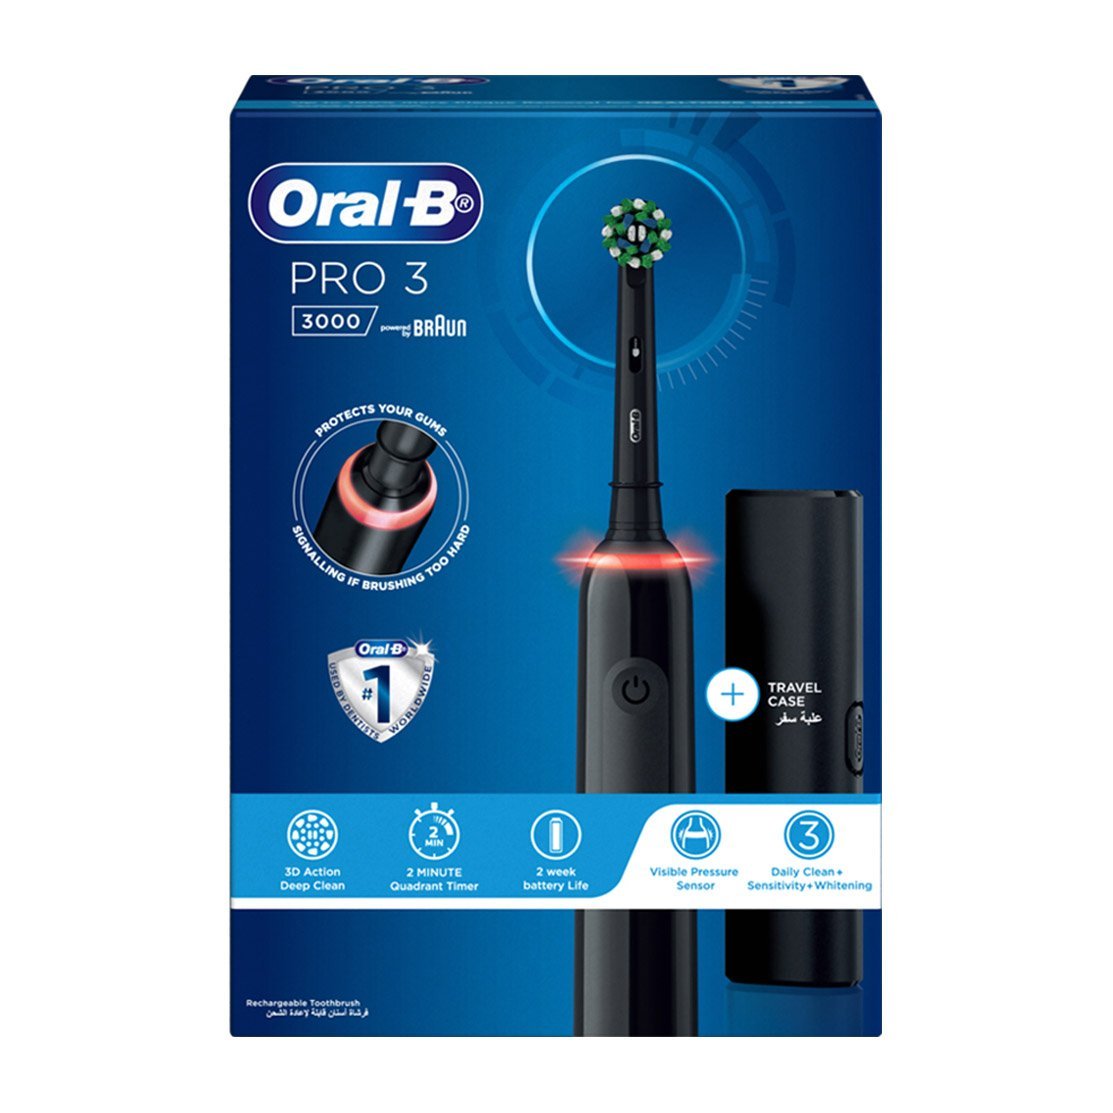 Oral-B Pro 3 (3000) Electric Toothbrush - Bloom Pharmacy